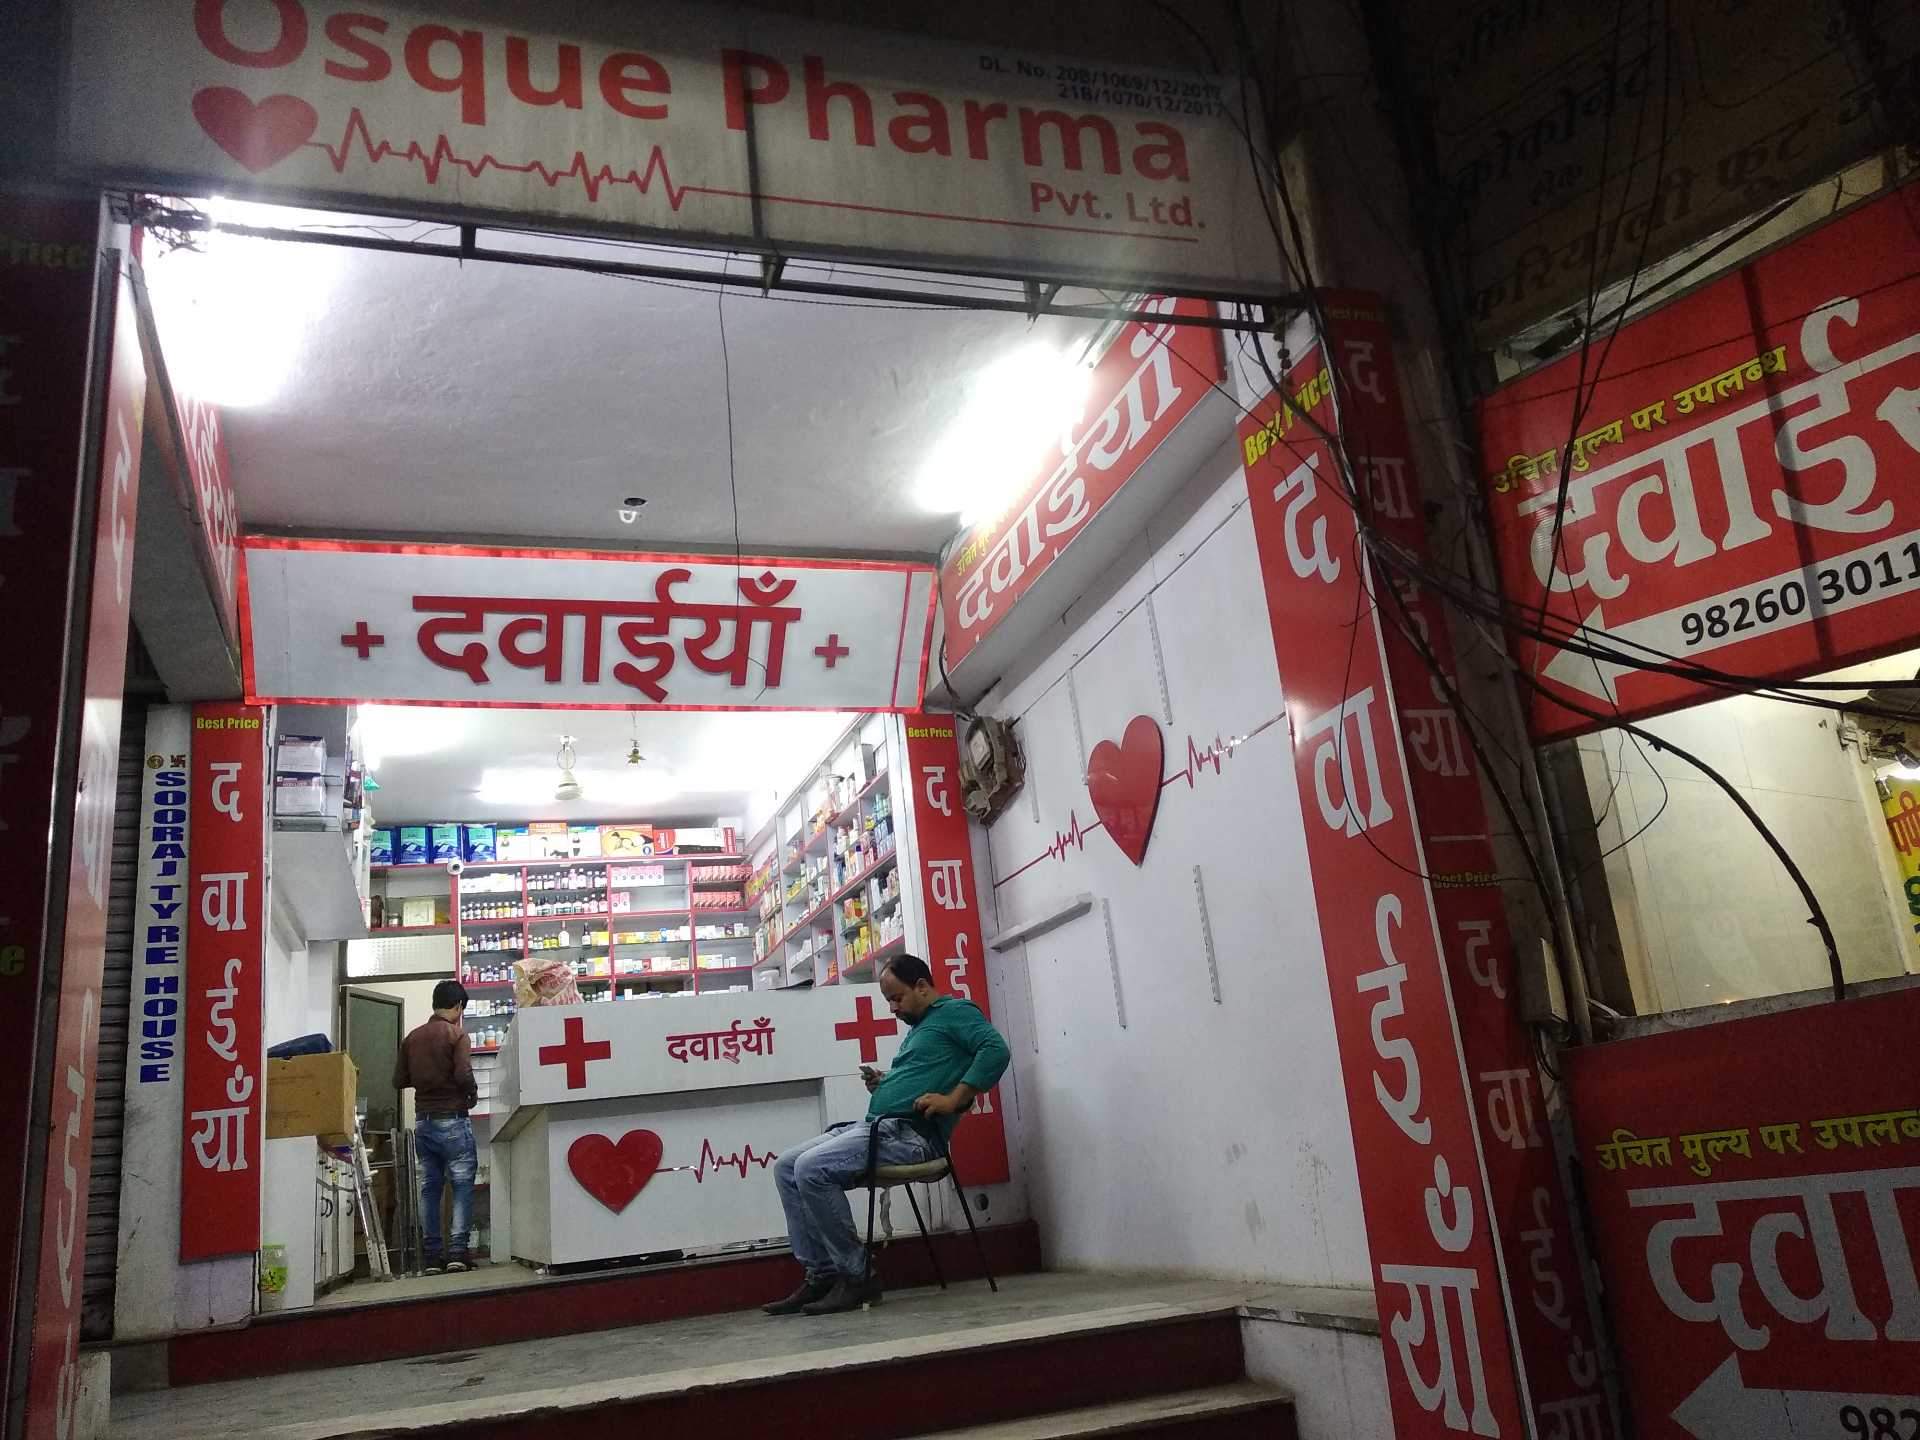 Osque Pharma Photos Rnt Road Indore Pictures Image Gallery